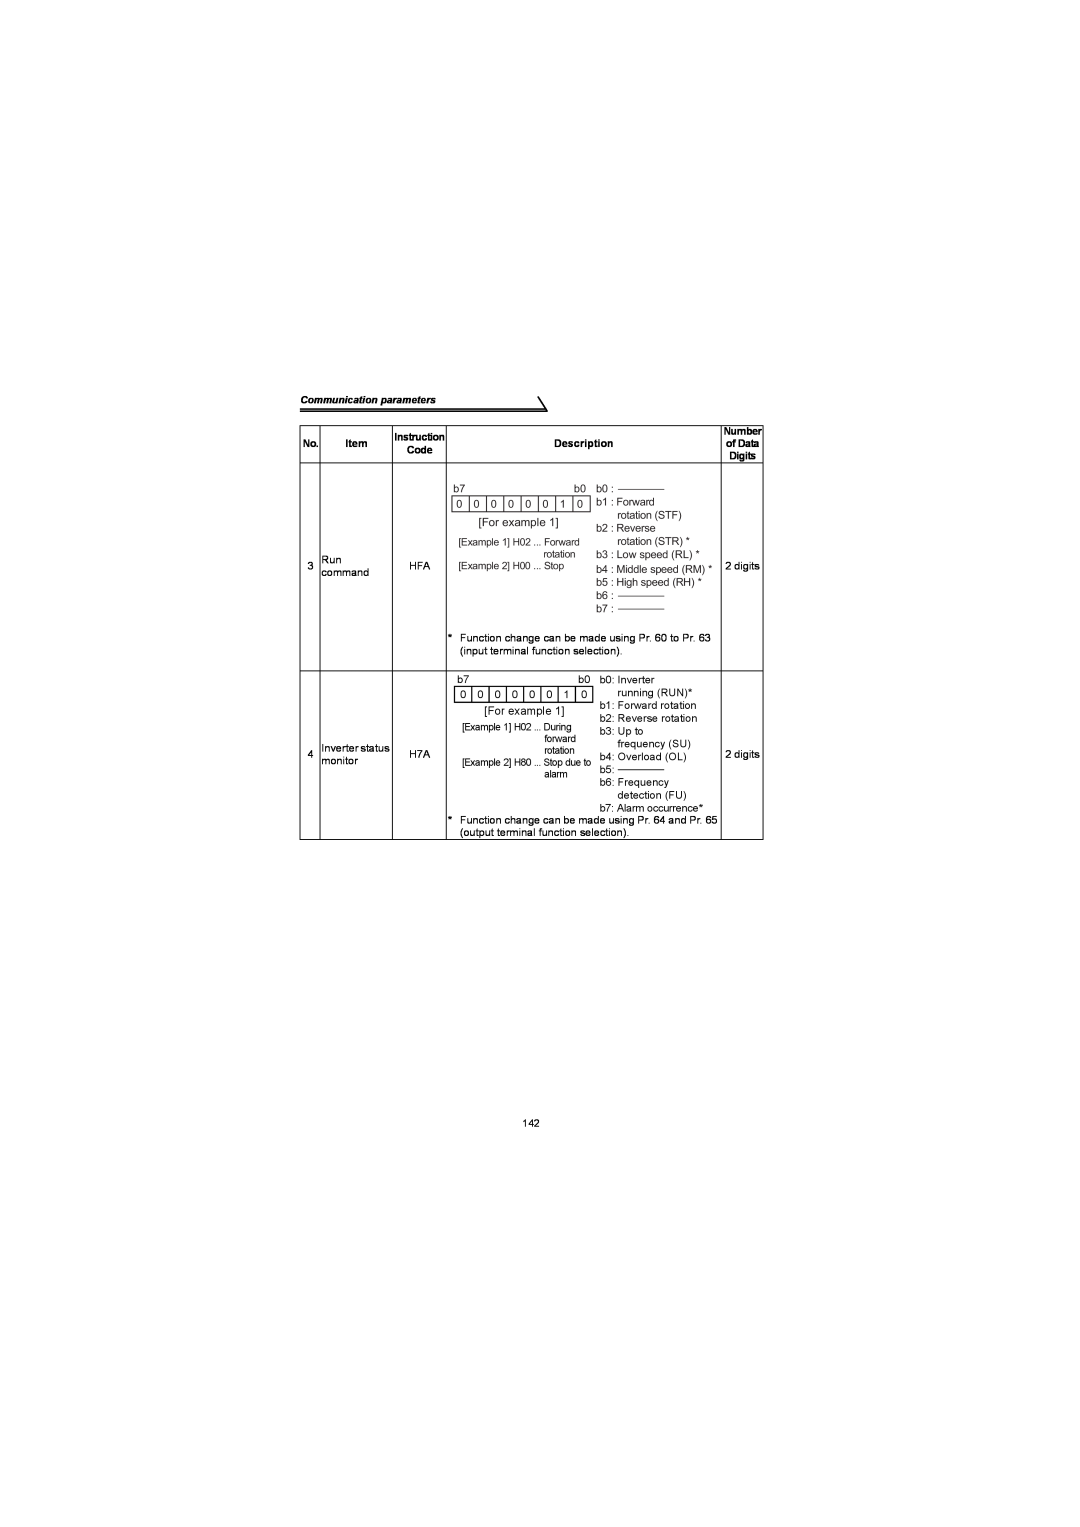 Mitsubishi Electronics FR-S500 instruction manual For example, Communication parameters 